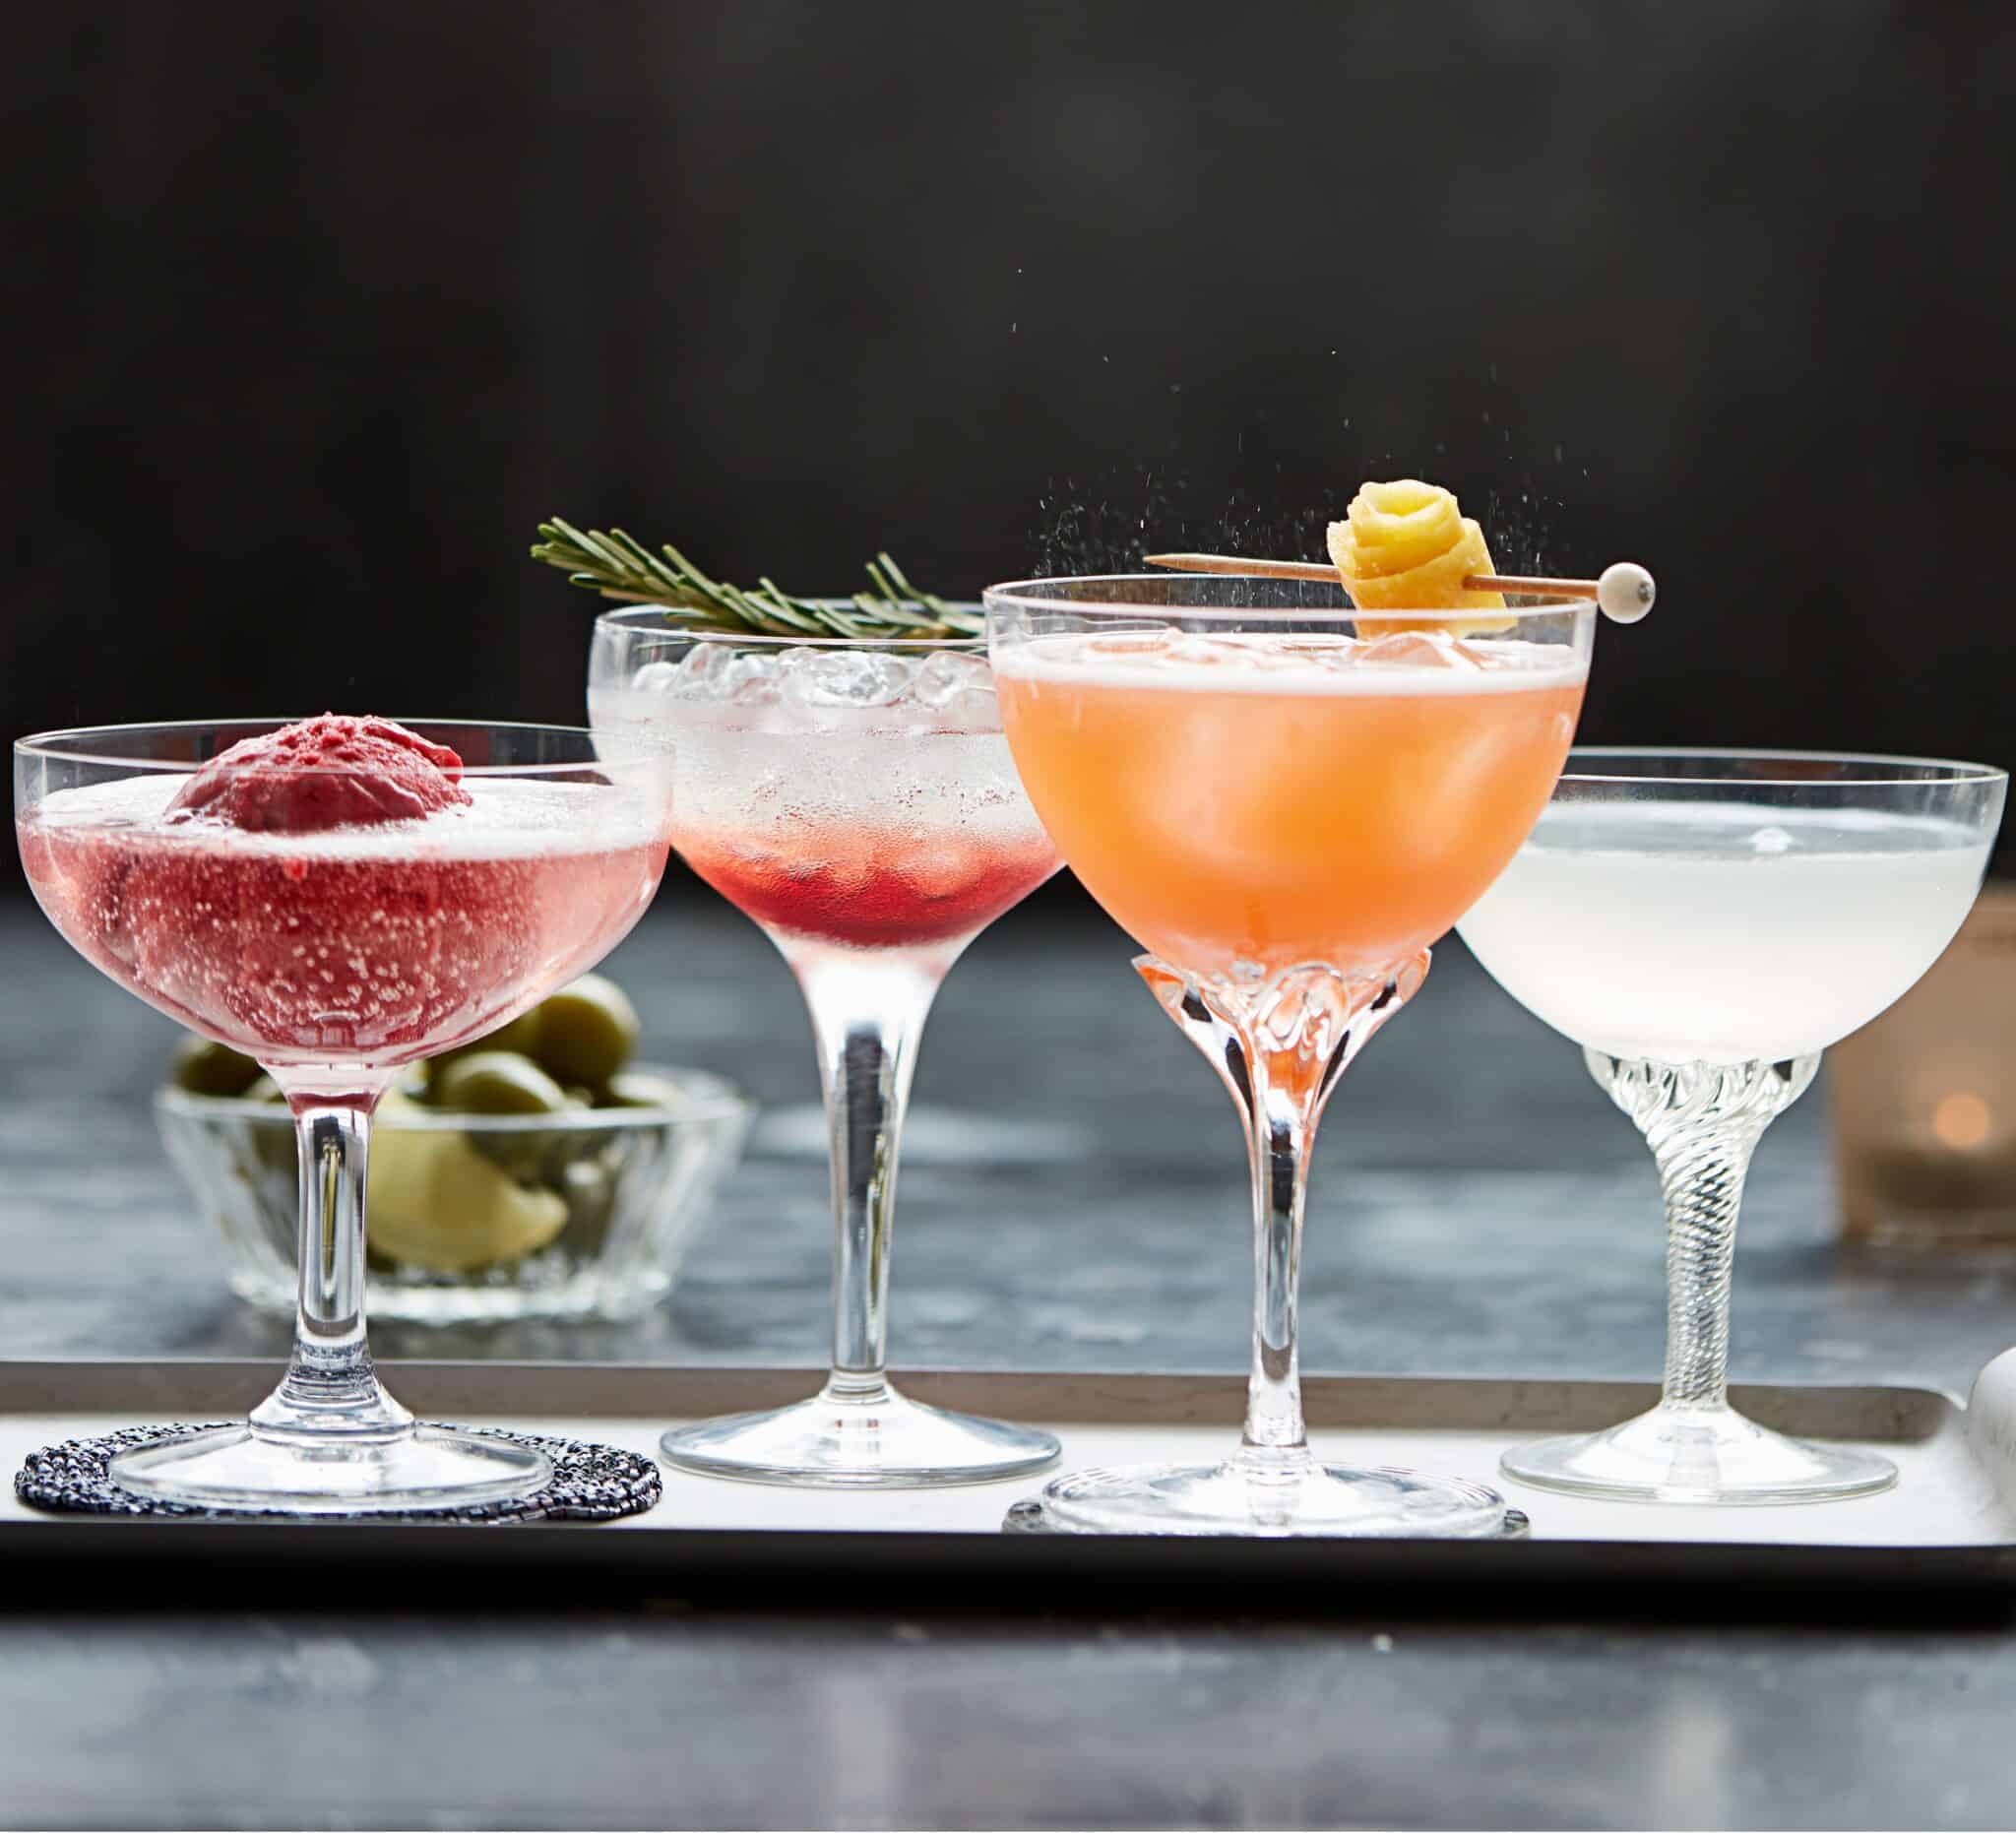 4 different cocktails in different shape glasses with garnishes